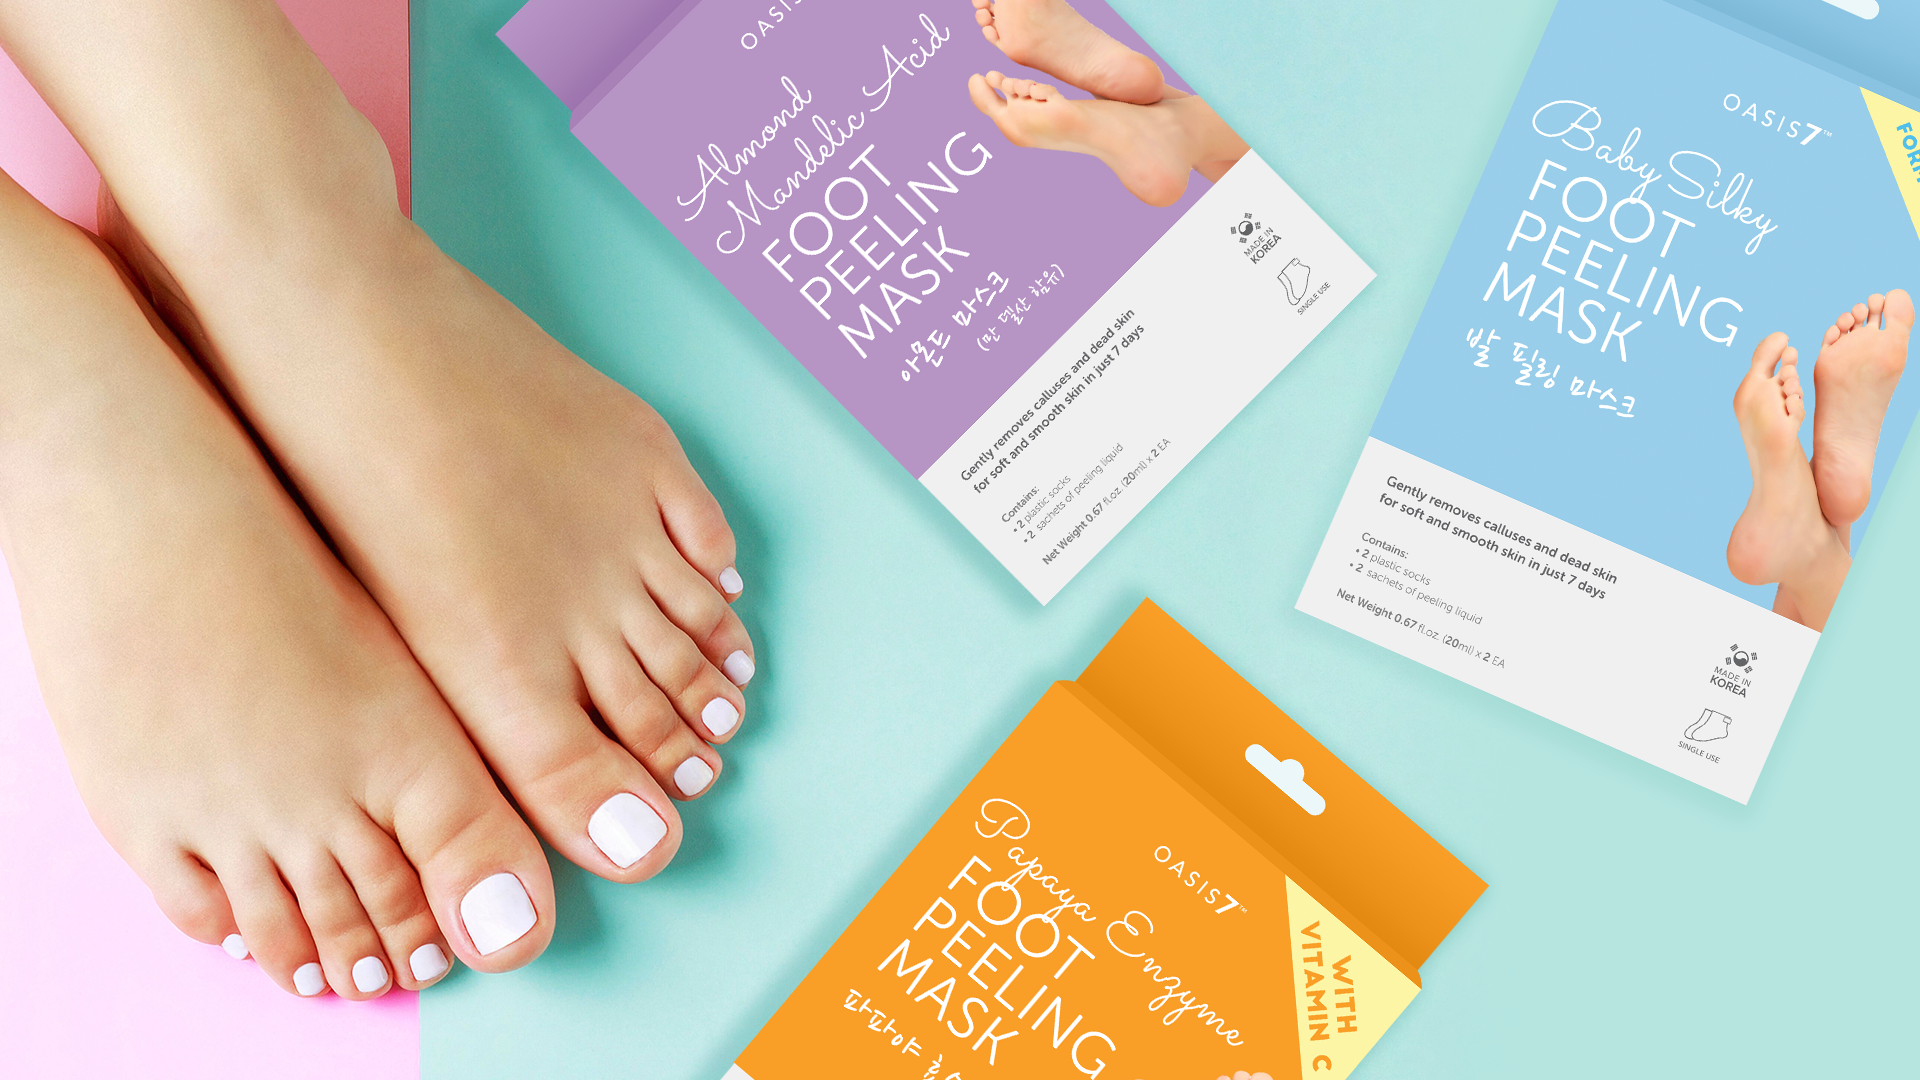 FOOT PEELING COLLECTION (Copy)